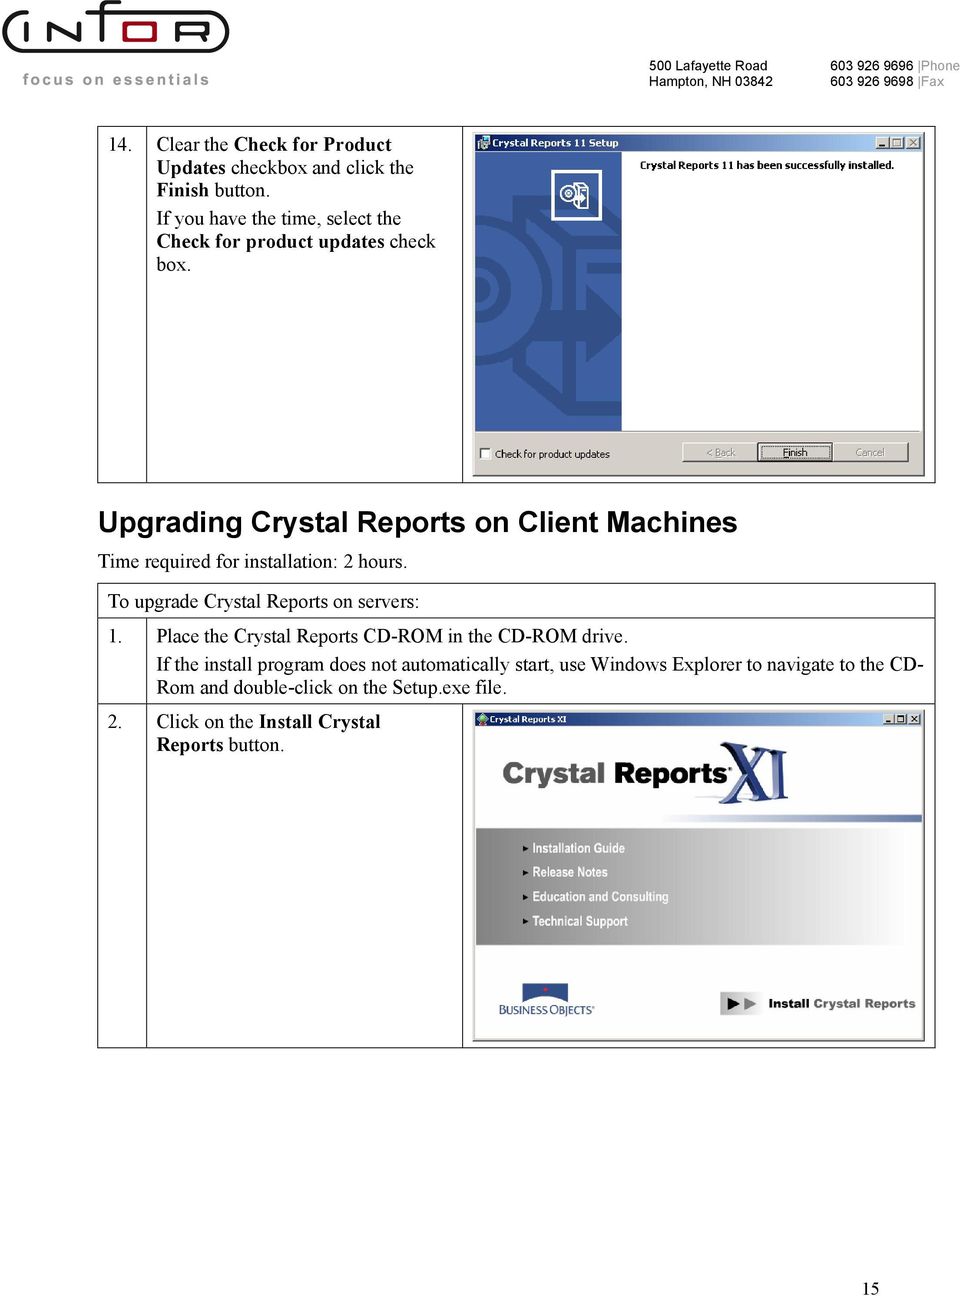 Upgrading Crystal Reports on Client Machines Time required for installation: 2 hours. To upgrade Crystal Reports on servers: 1.